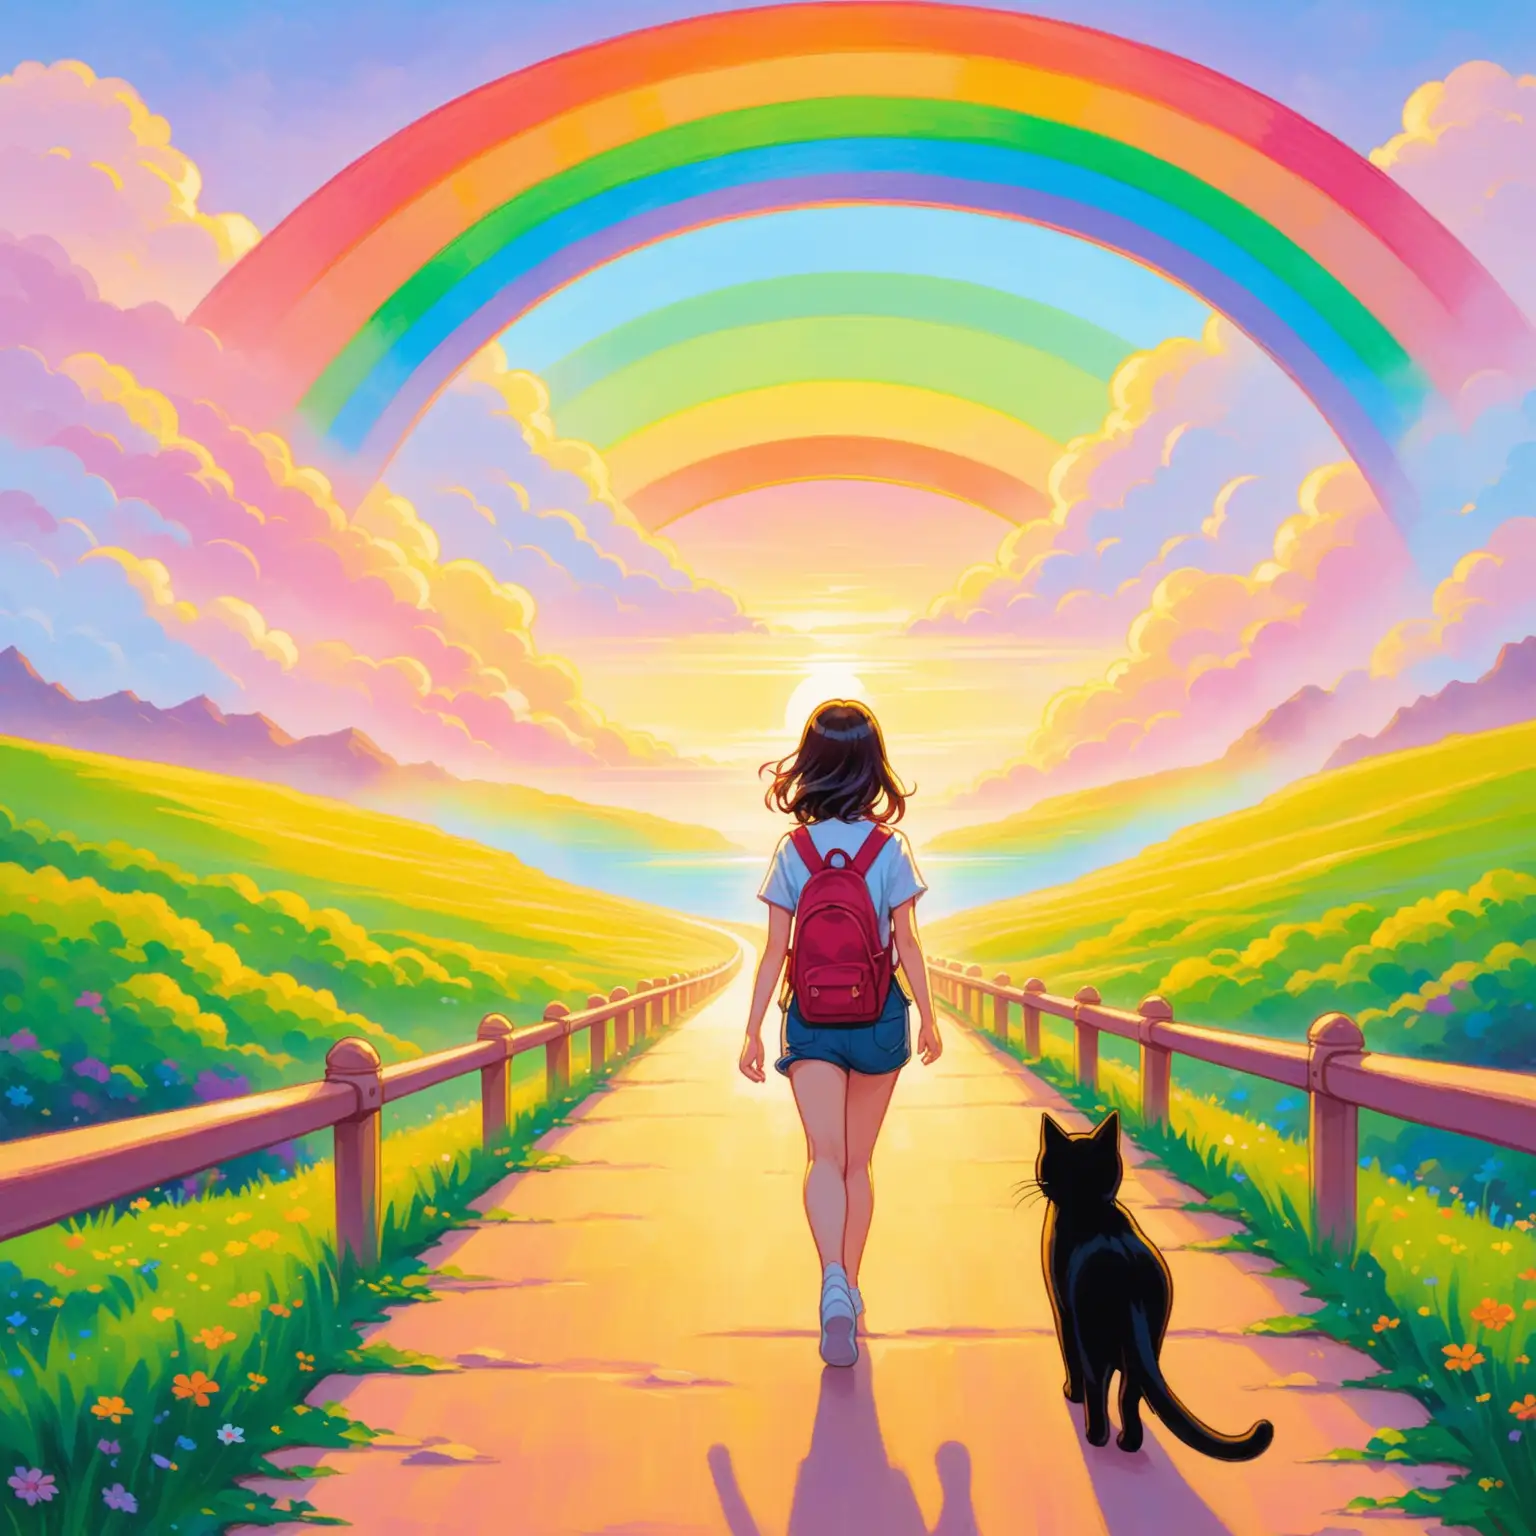 a cartoon oil painting of a young woman walking towards a rainbow bridge with a black cat walking alongside her